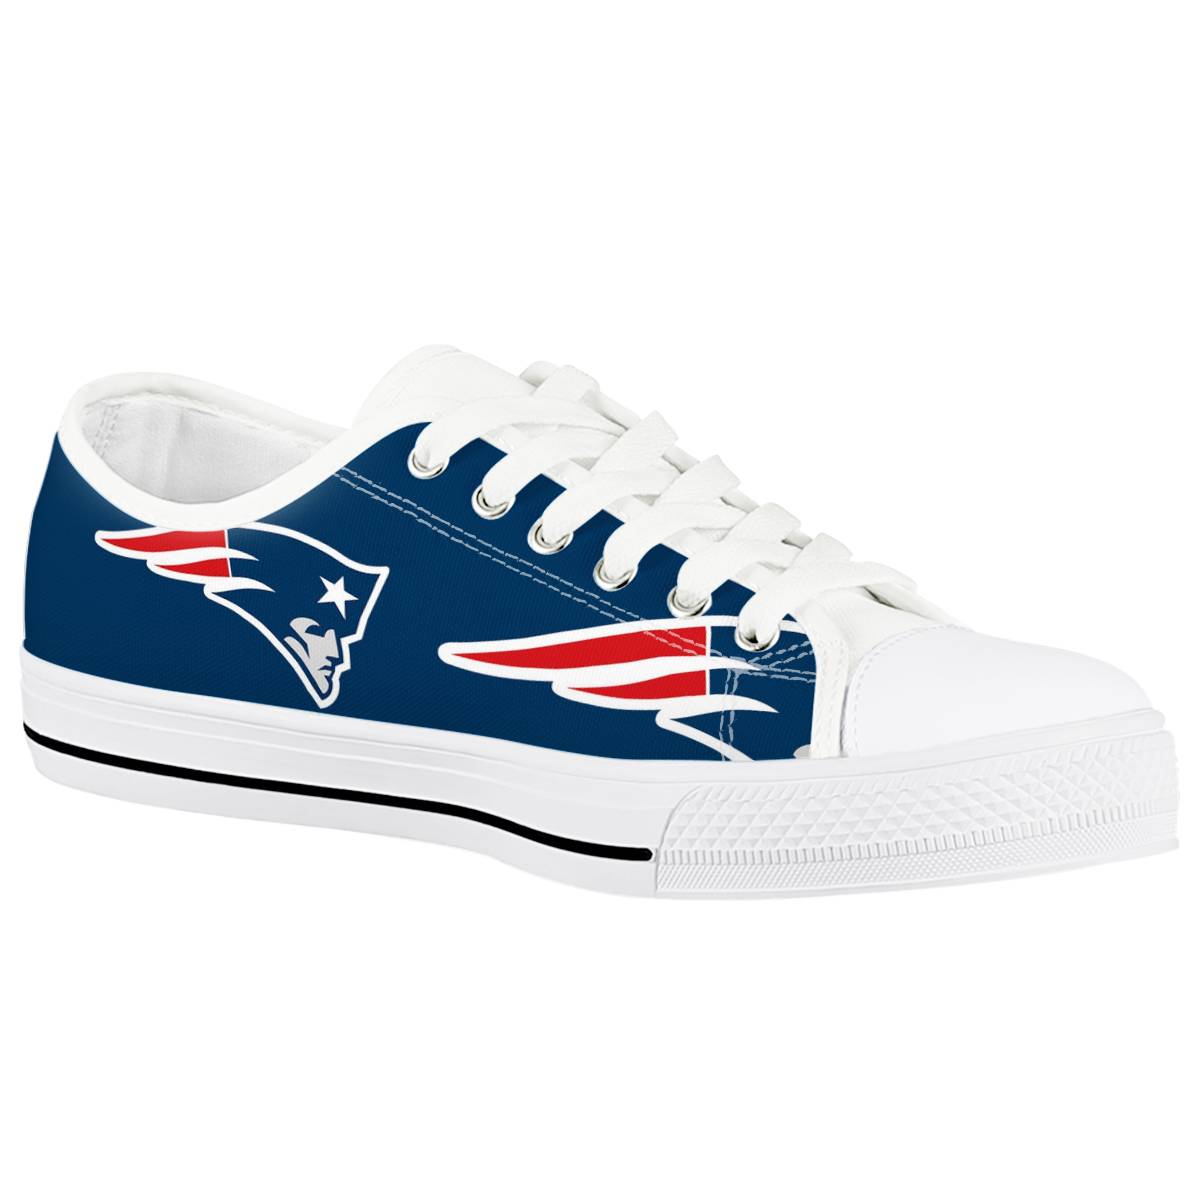 Women's New England Patriots Low Top Canvas Sneakers 008